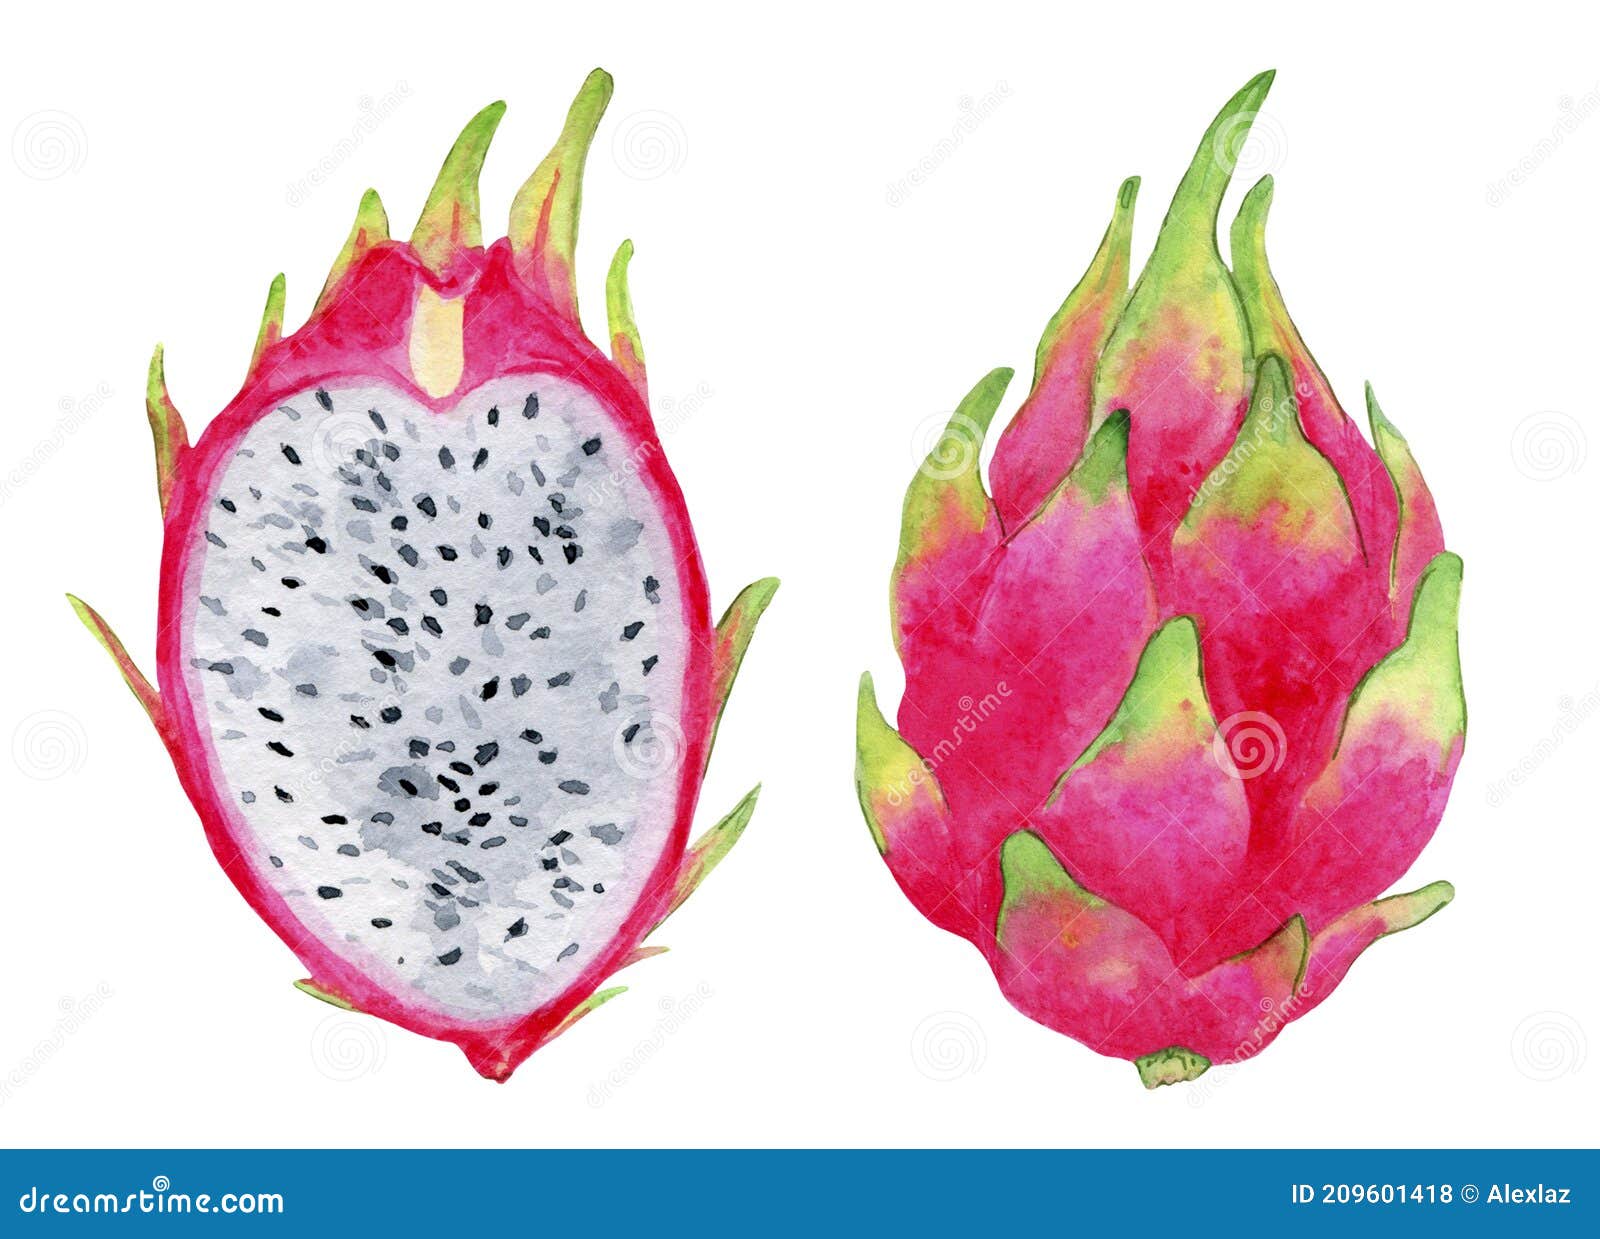 Ripe, Pink Dragon Fruit, Whole And Cut, Juicy Illustration. Stock Photo ...